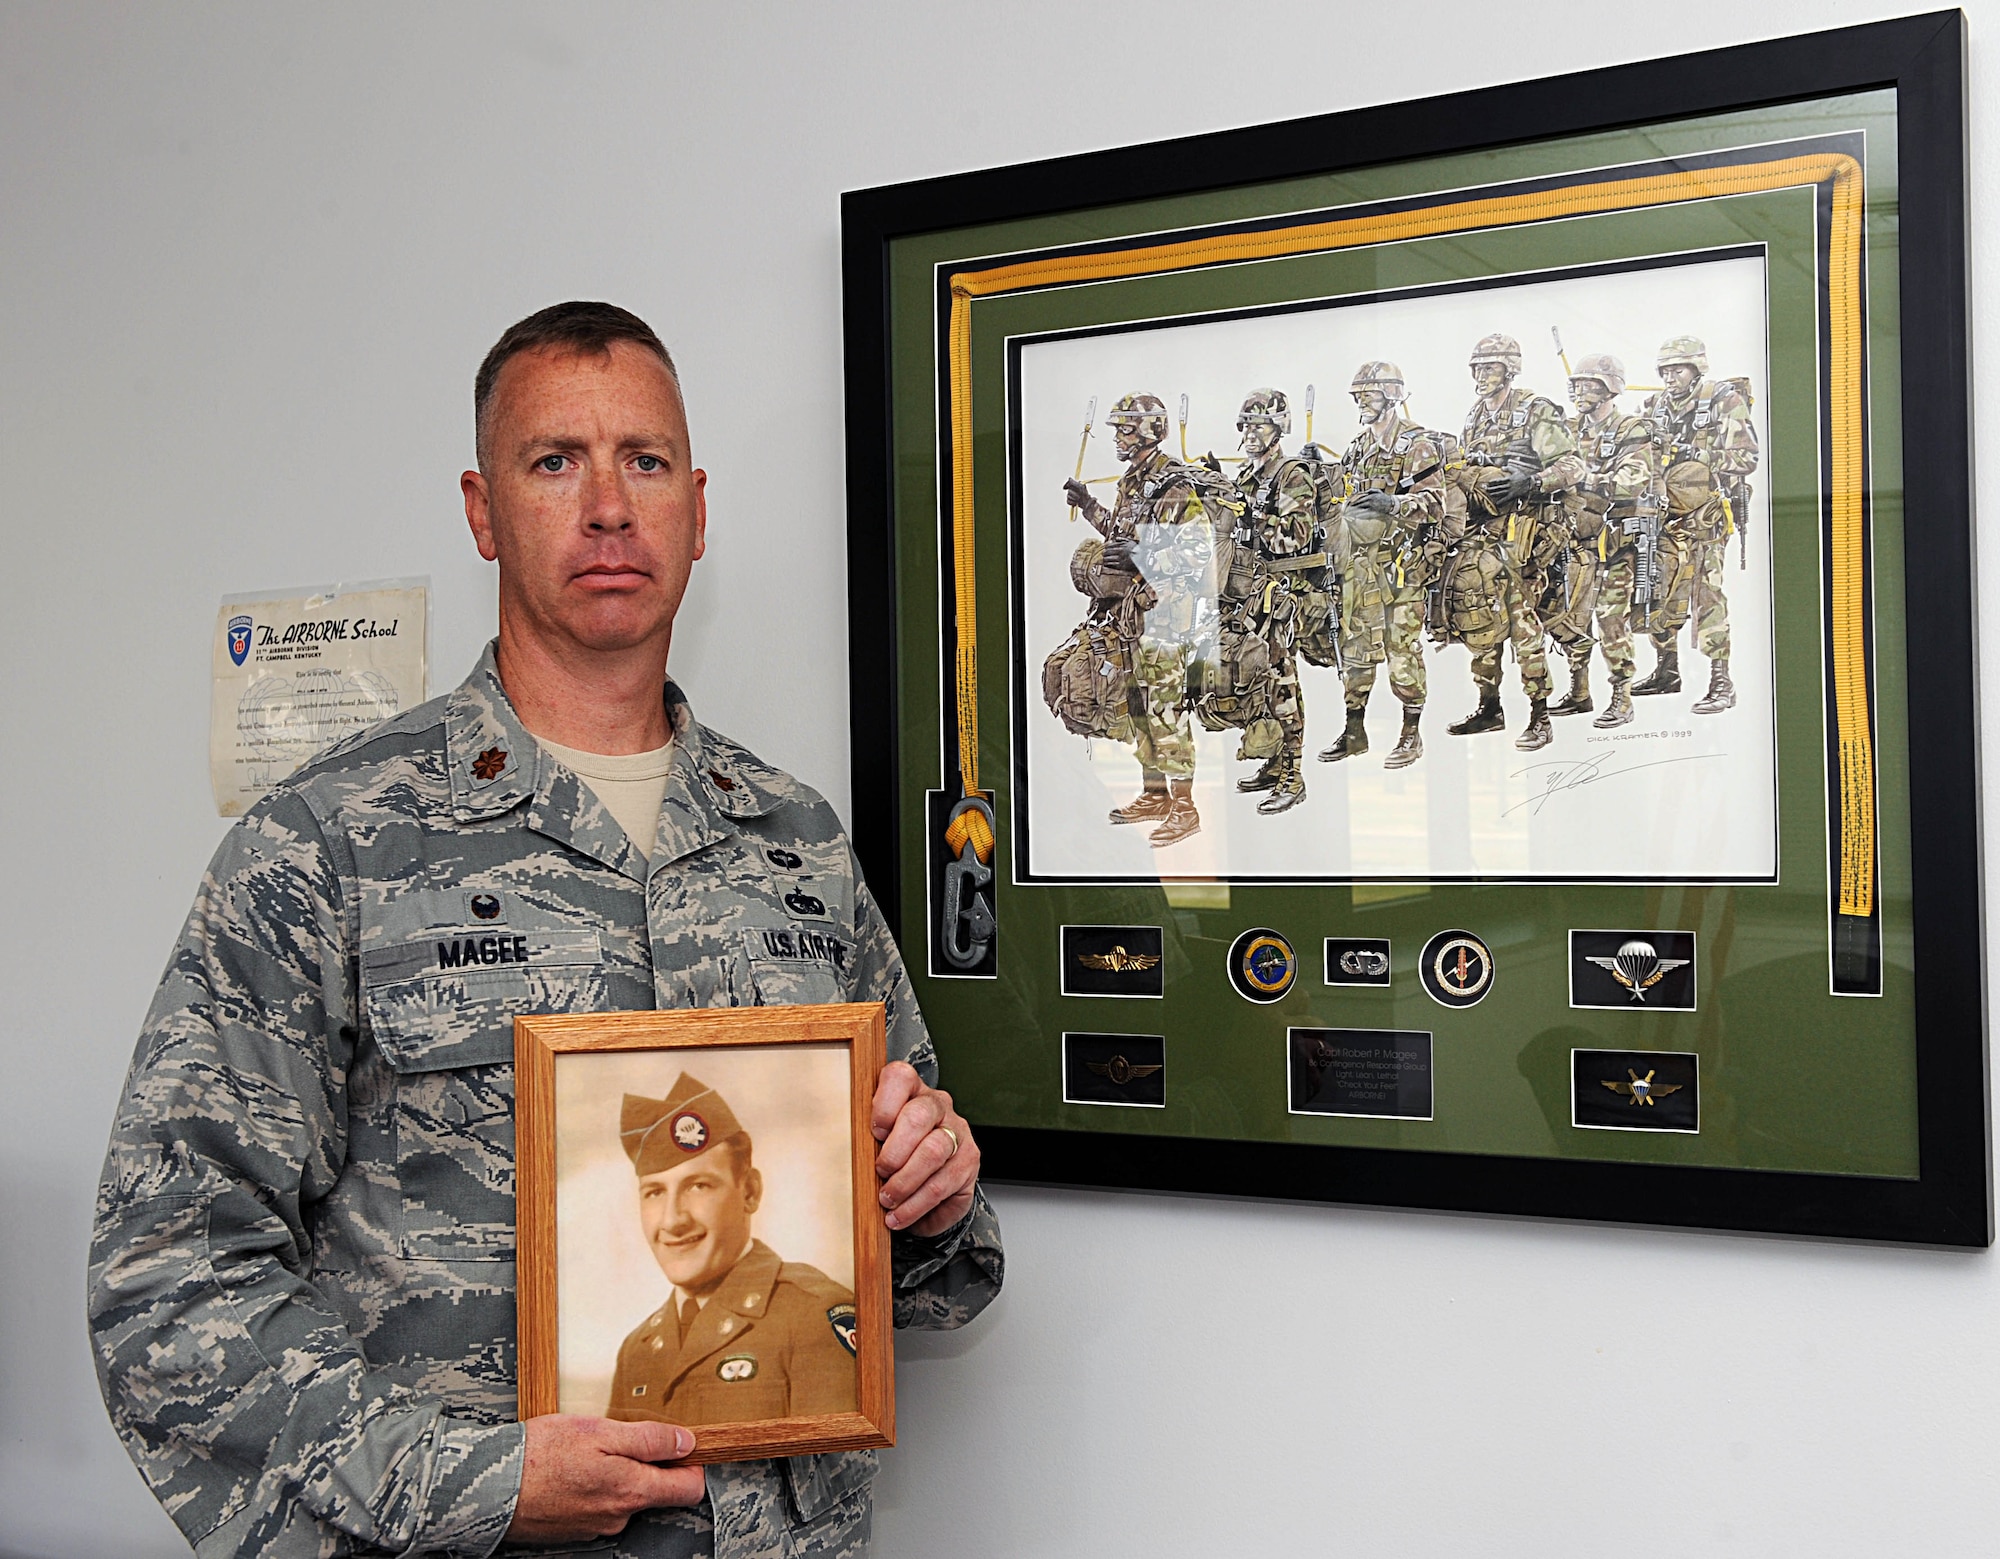 Maj. Robert Magee, 22nd Logistics Readiness Squadron commander, poses with a photo of his grandfather in front of his paratrooper mementos, Sept. 29, 2014, at McConnell Air Force Base, Kan. Magee is successfully bringing his grandfather’s legacy back to light in order to honor the sacrifice he made during the Korean War. (U.S. Air Force photo/Airman 1st Class David Bernal Del Agua)